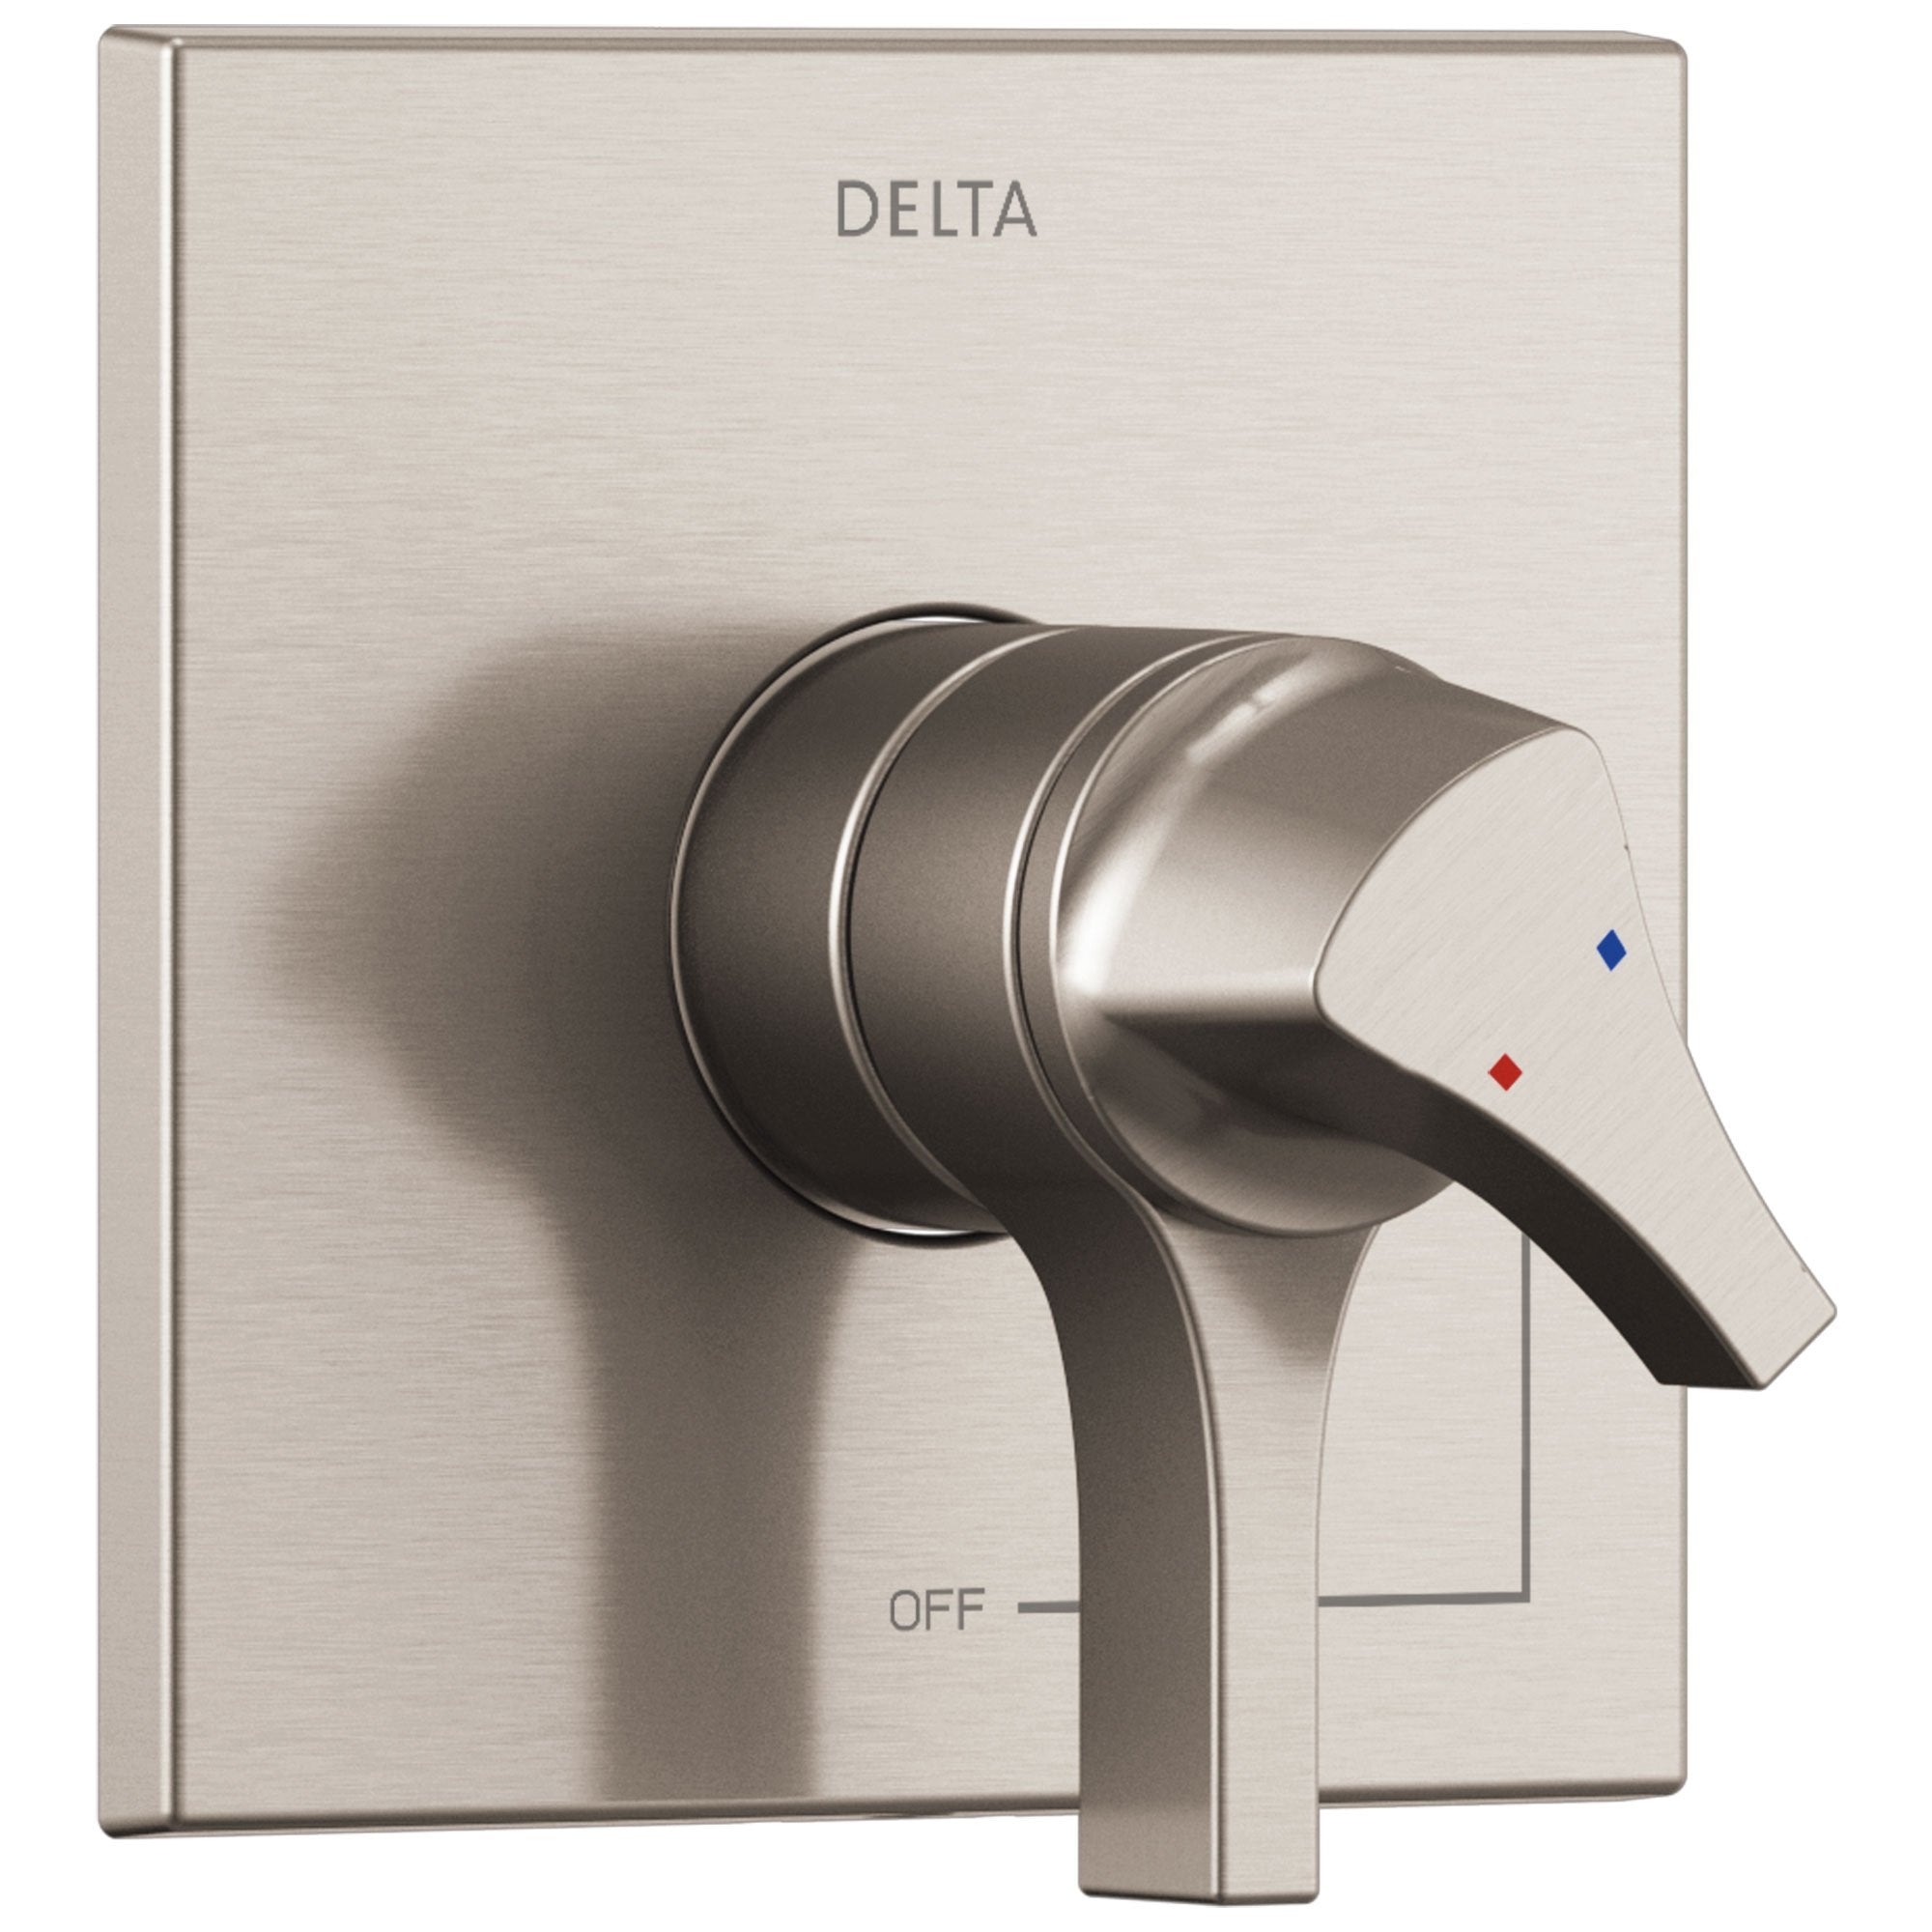 Delta Zura Stainless Steel Finish Monitor 17 Dual Temperature and Water Pressure Shower Faucet Control Handle Includes Trim Kit and Valve without Stops D1972V